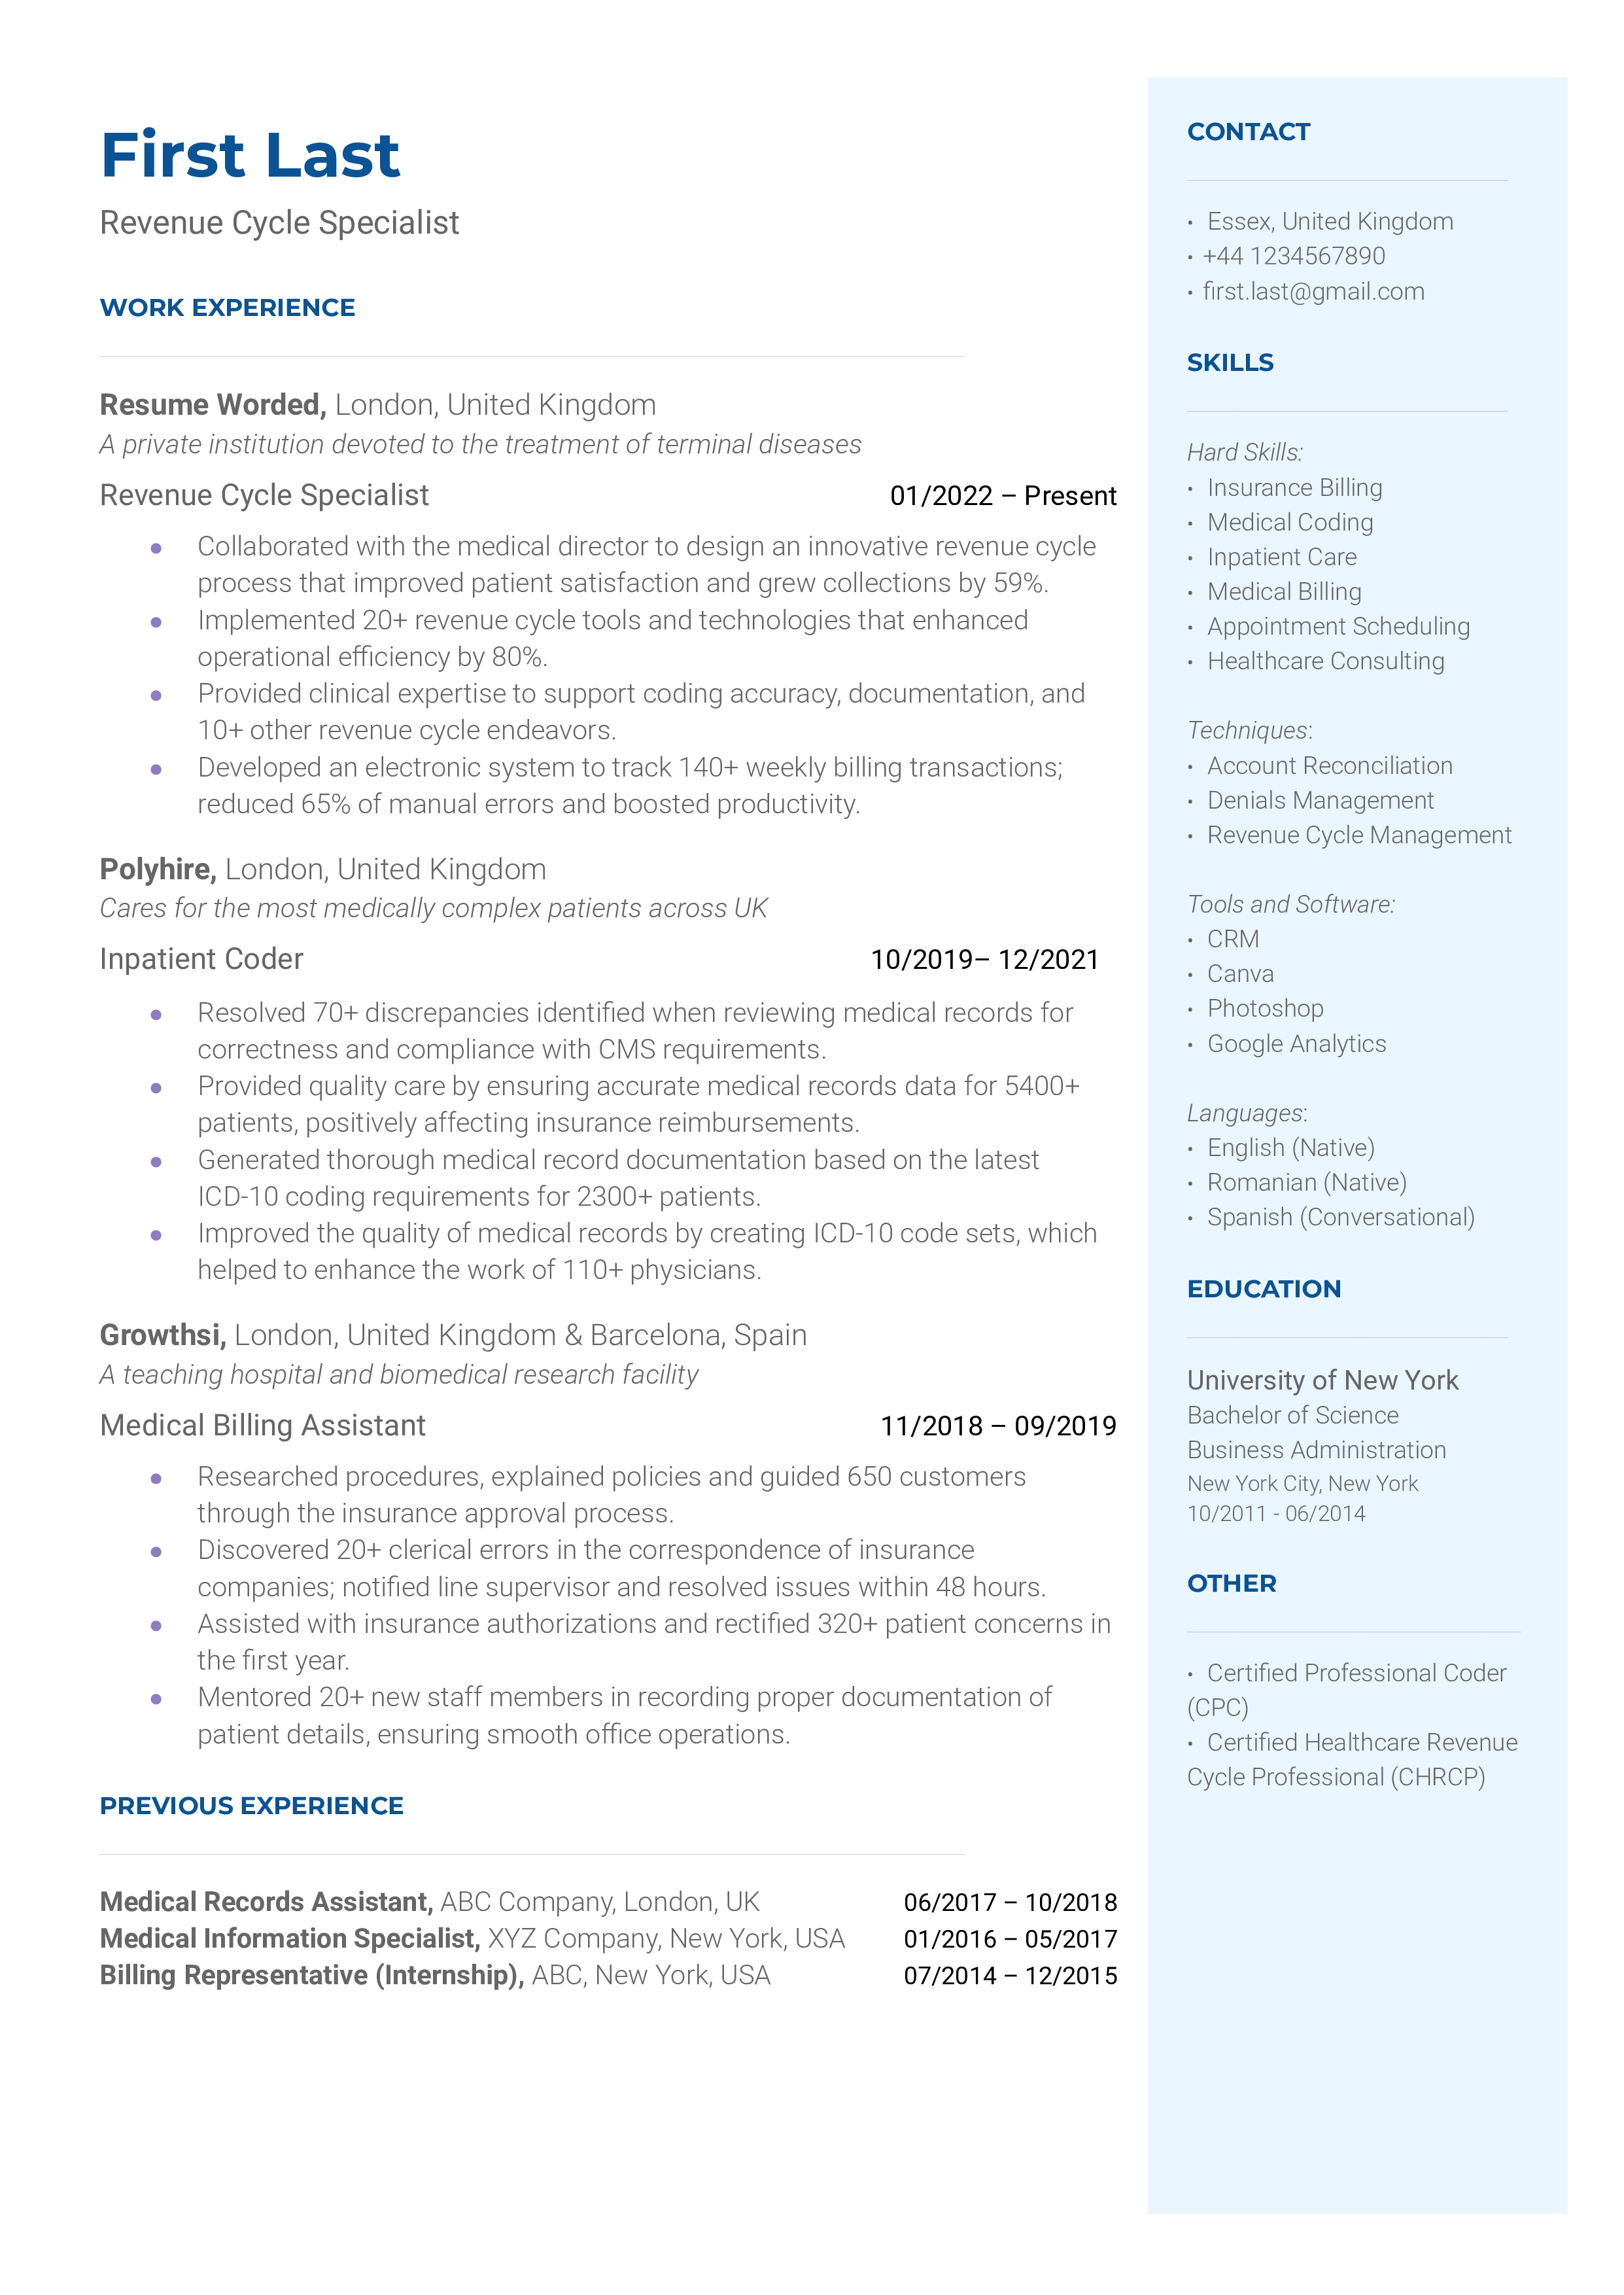 Revenue Cycle Specialist Resume Sample